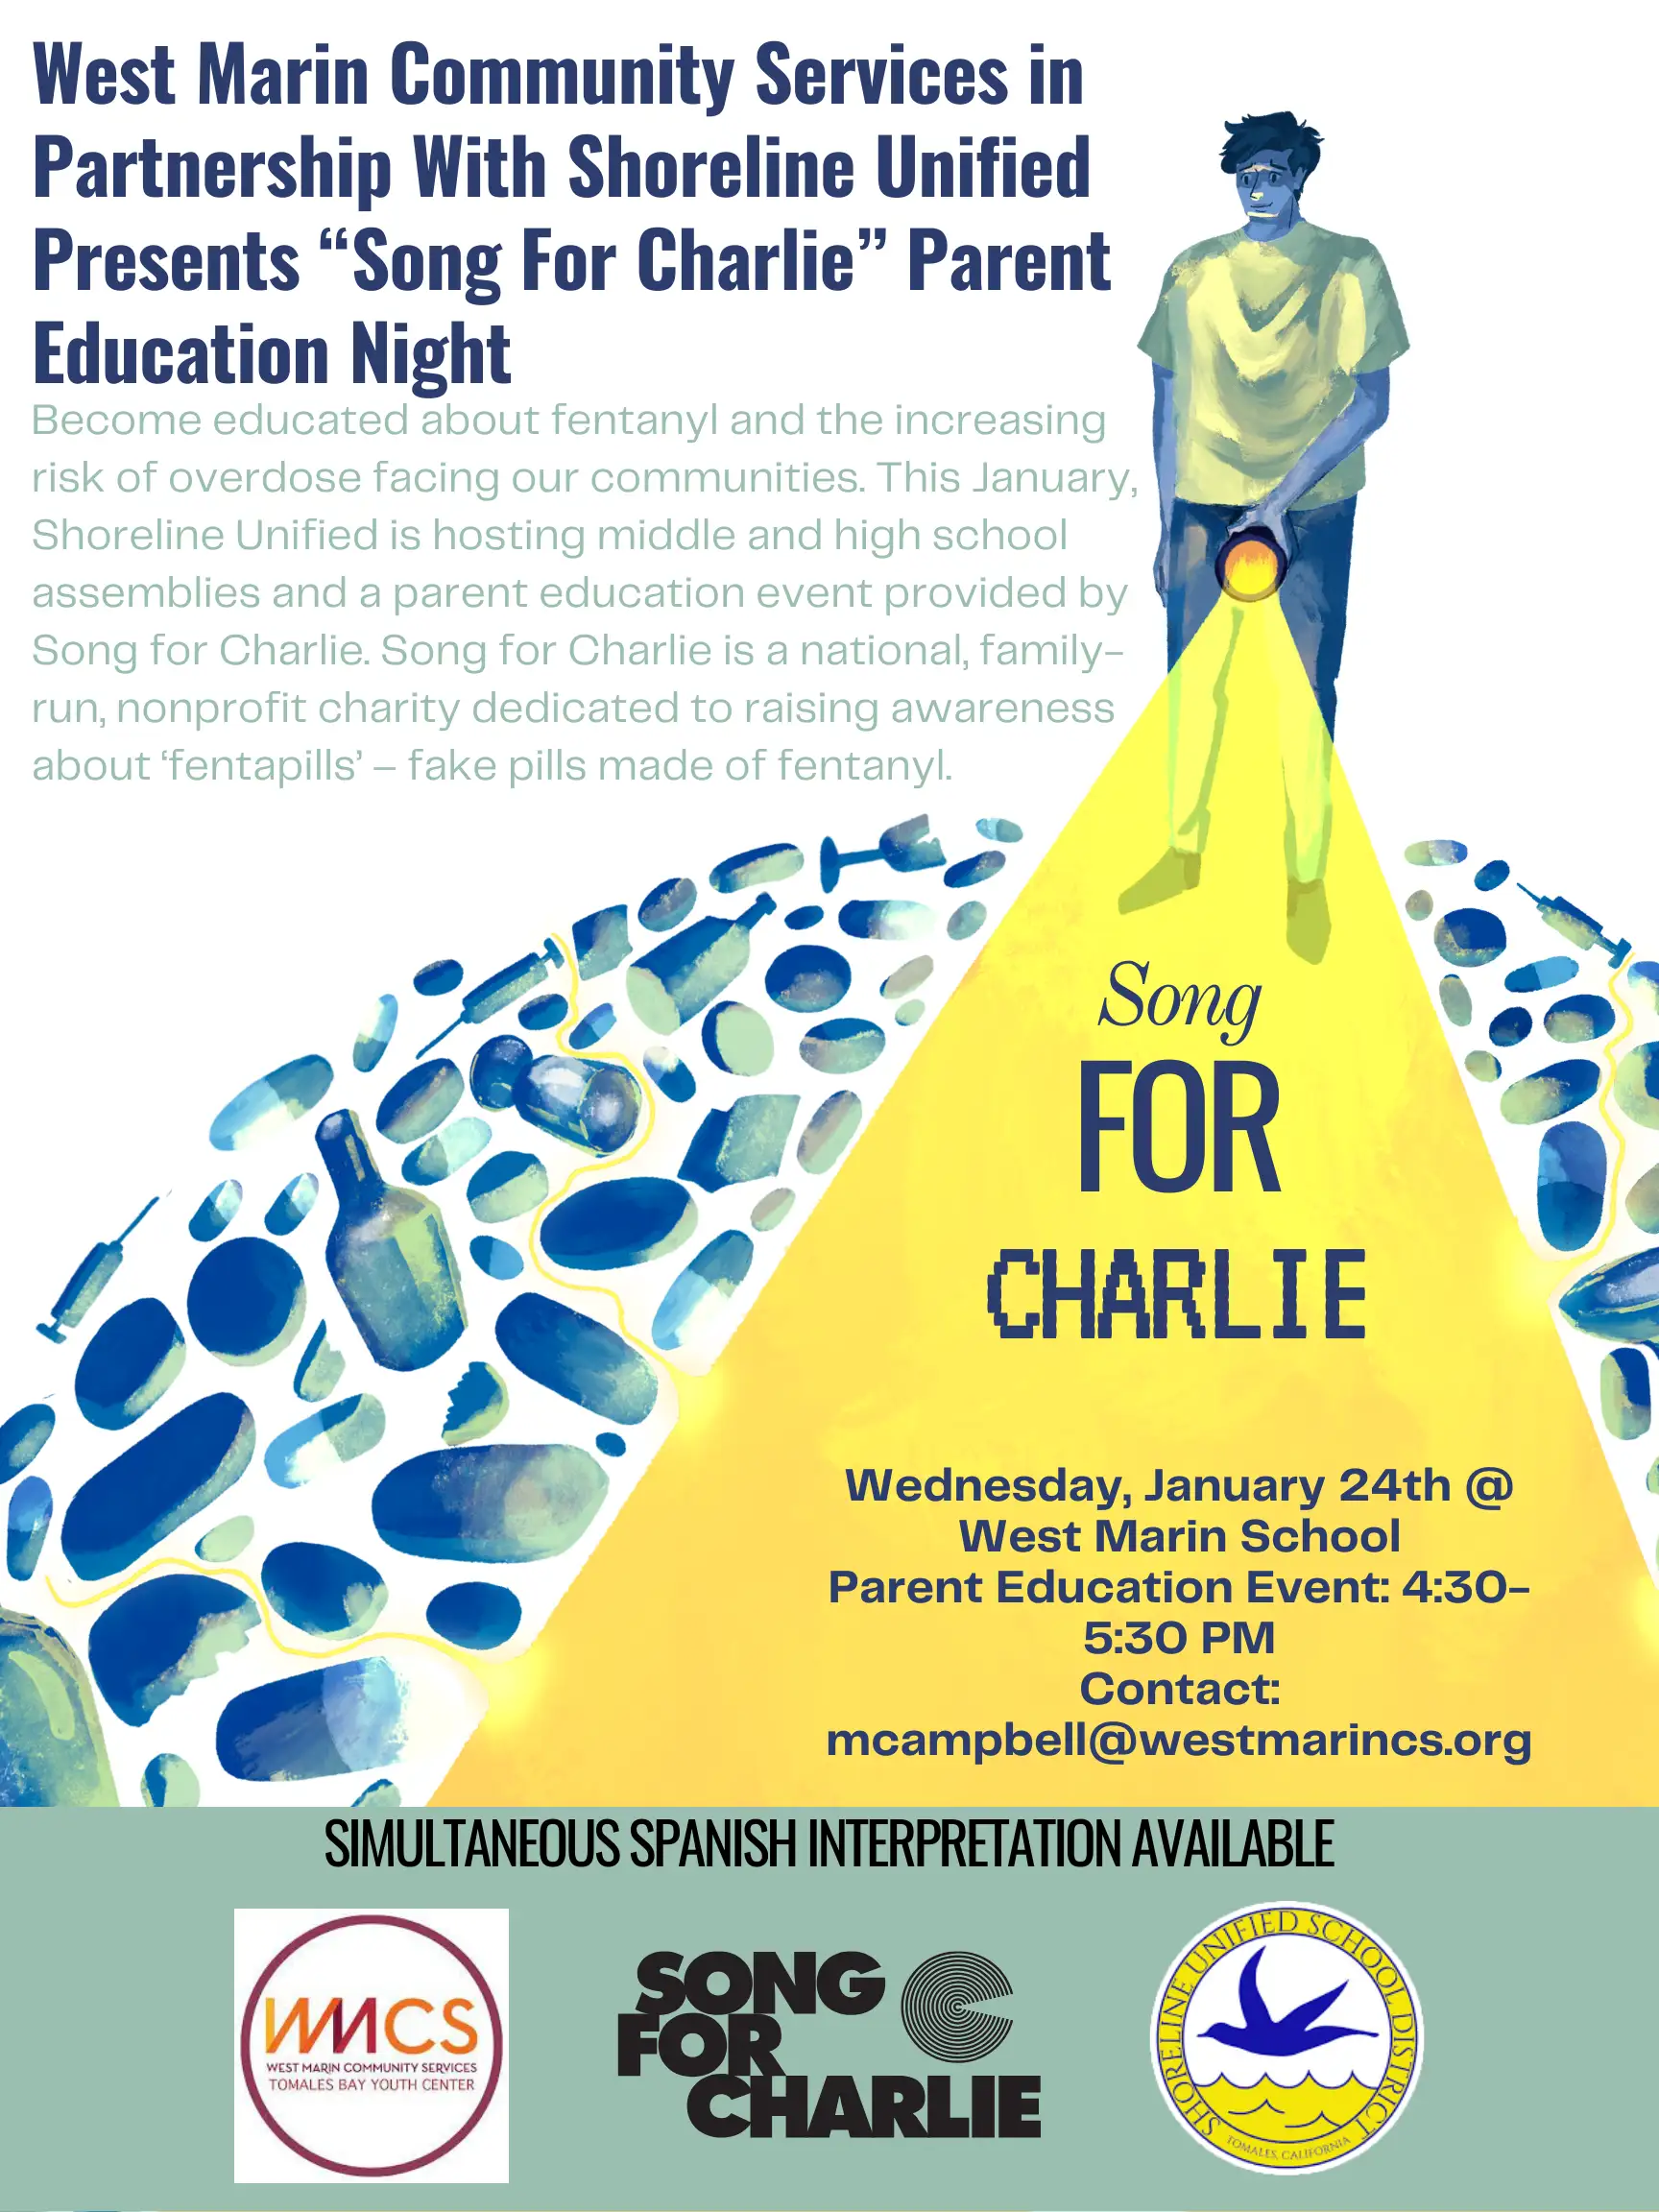 Song for Charlie parent event - west marin community services - Jan 24